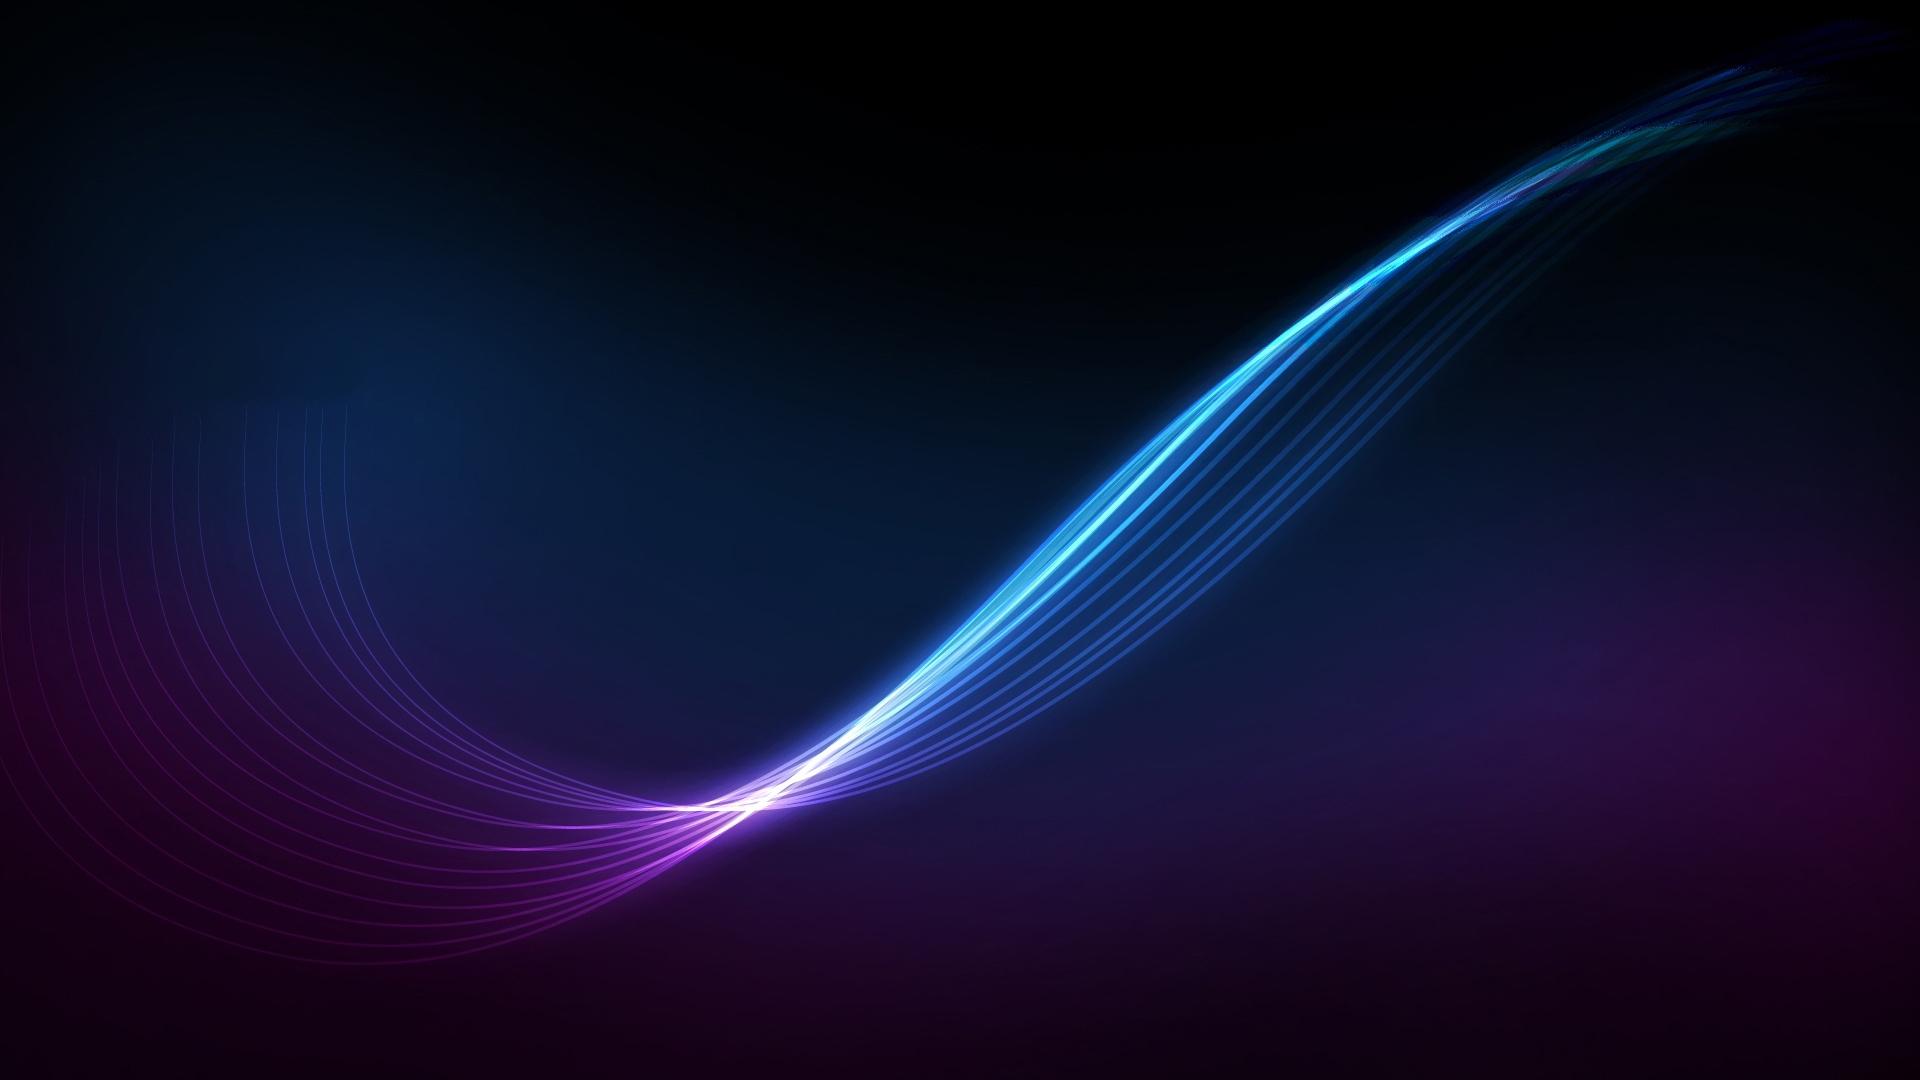 1920 x 1080 · jpeg - Simple Abstract Art Using Lines Wallpaper in HD - HD Wallpapers ...